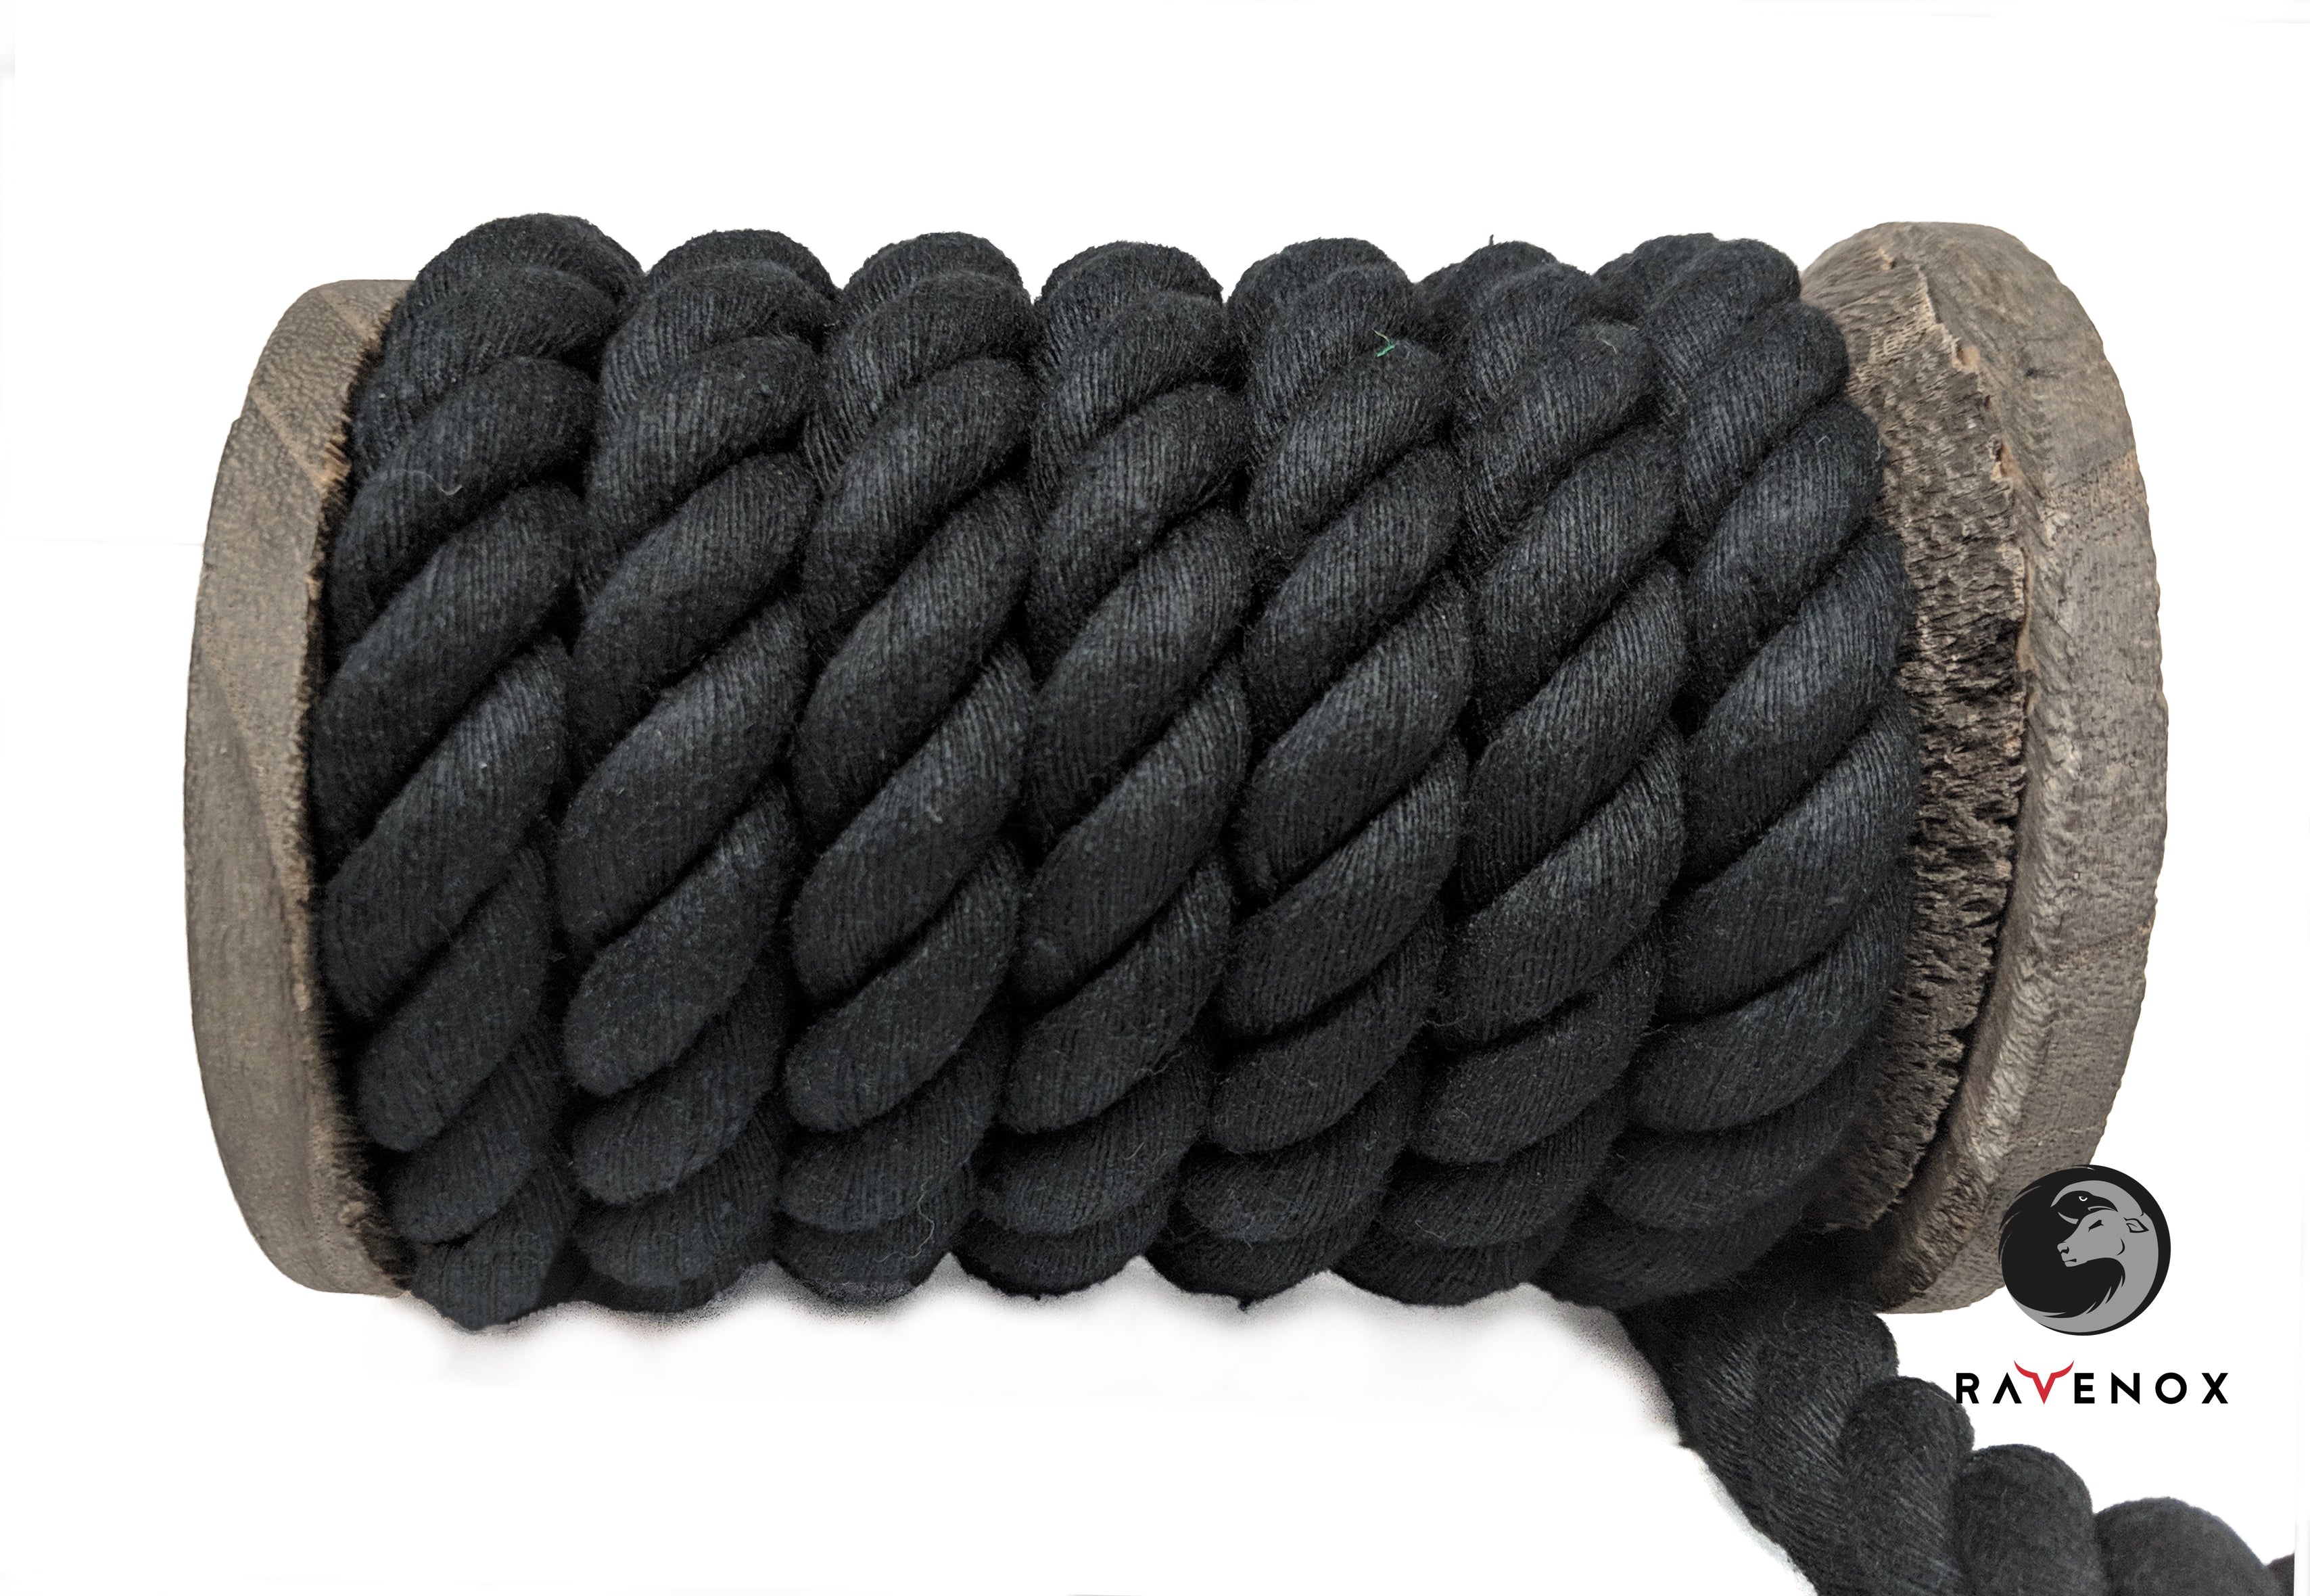 where to find paracord